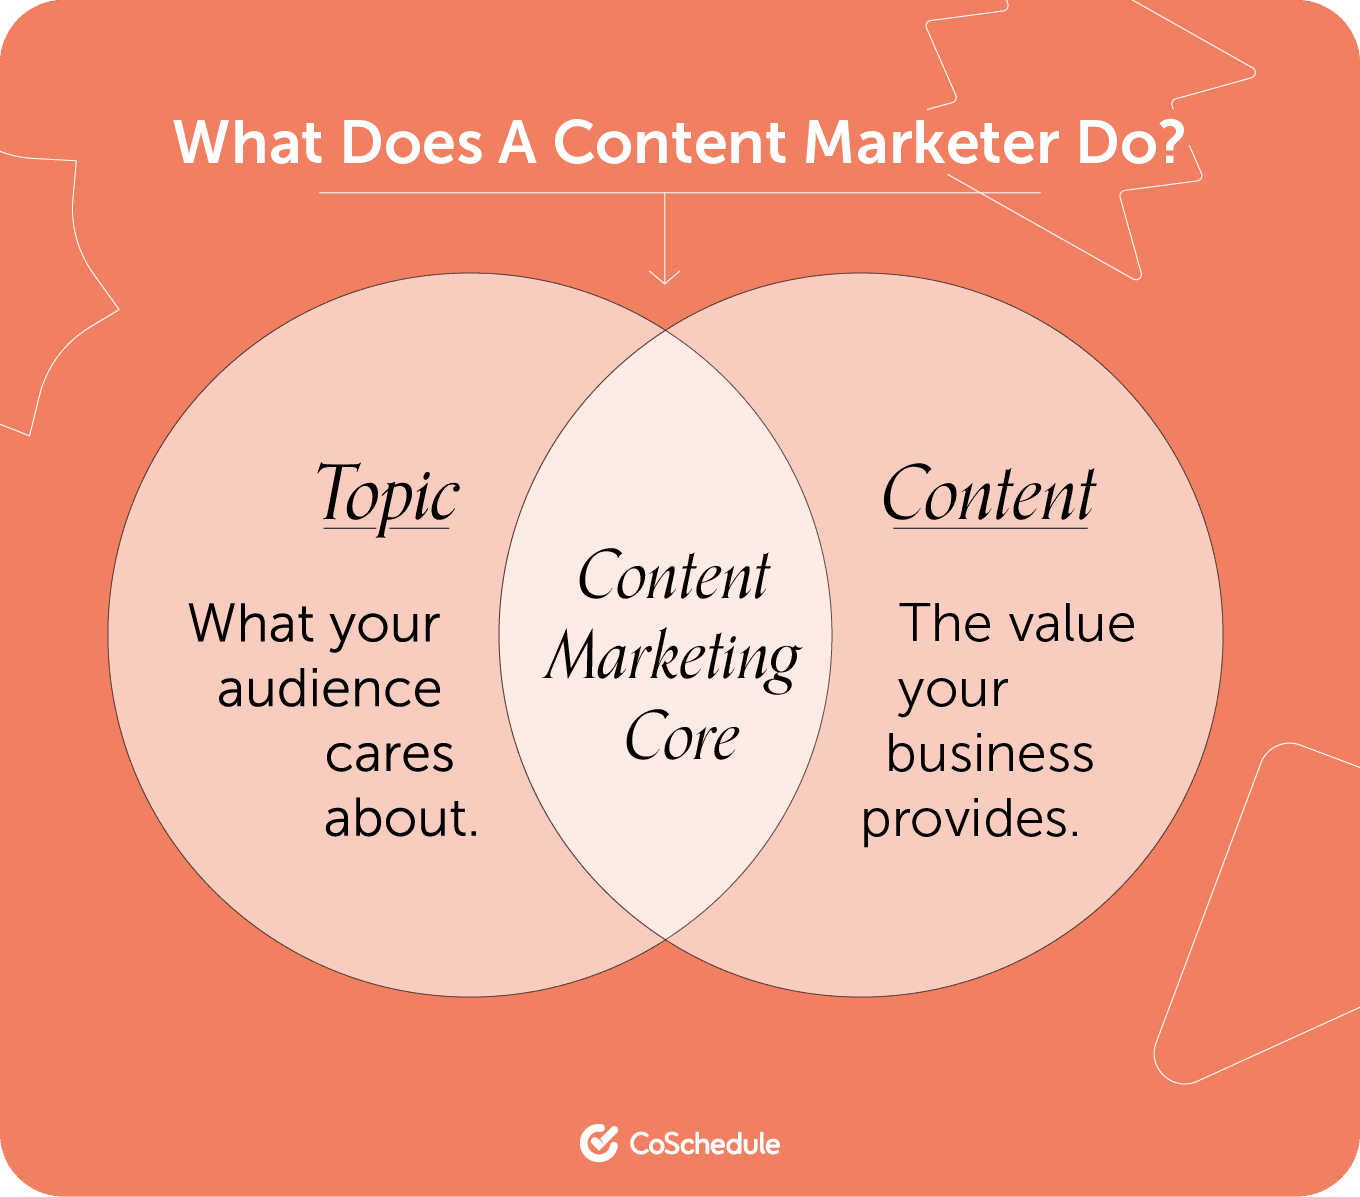 The topic and content of a content marketer shown by CoSchedule, with the topic being what the audience cares about, and the content being the value your business provides.